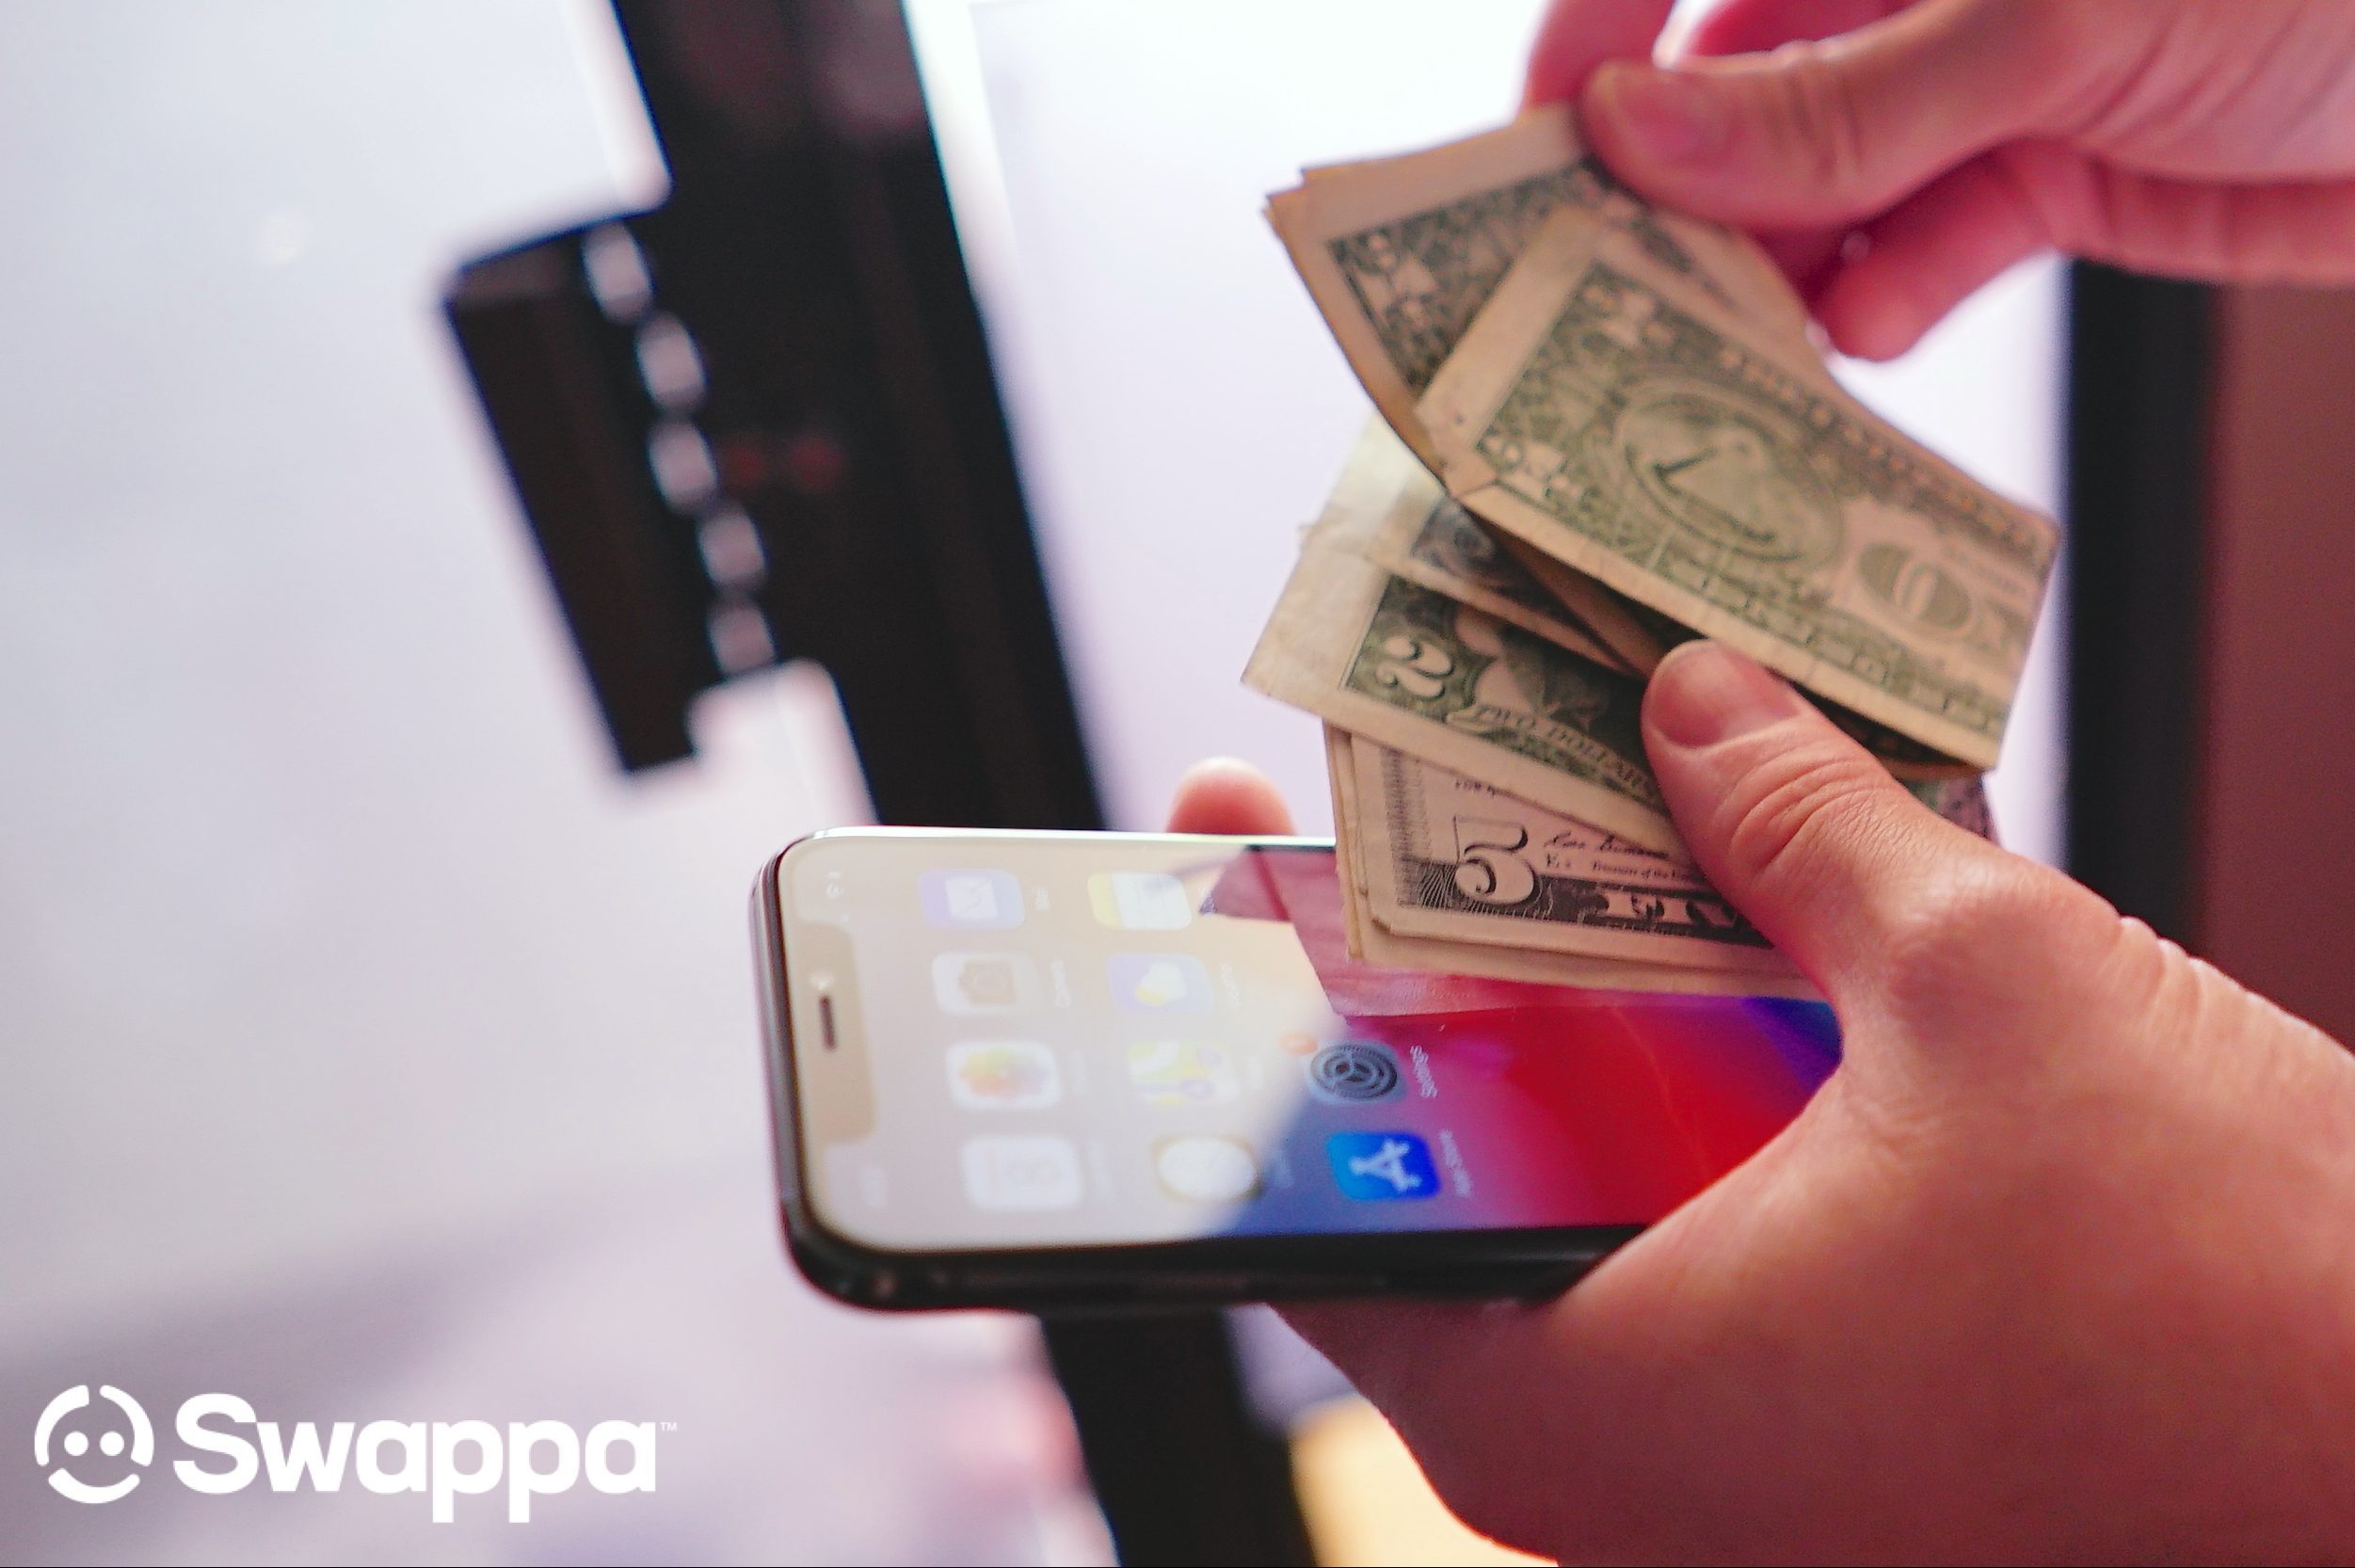 How to buy on Swappa